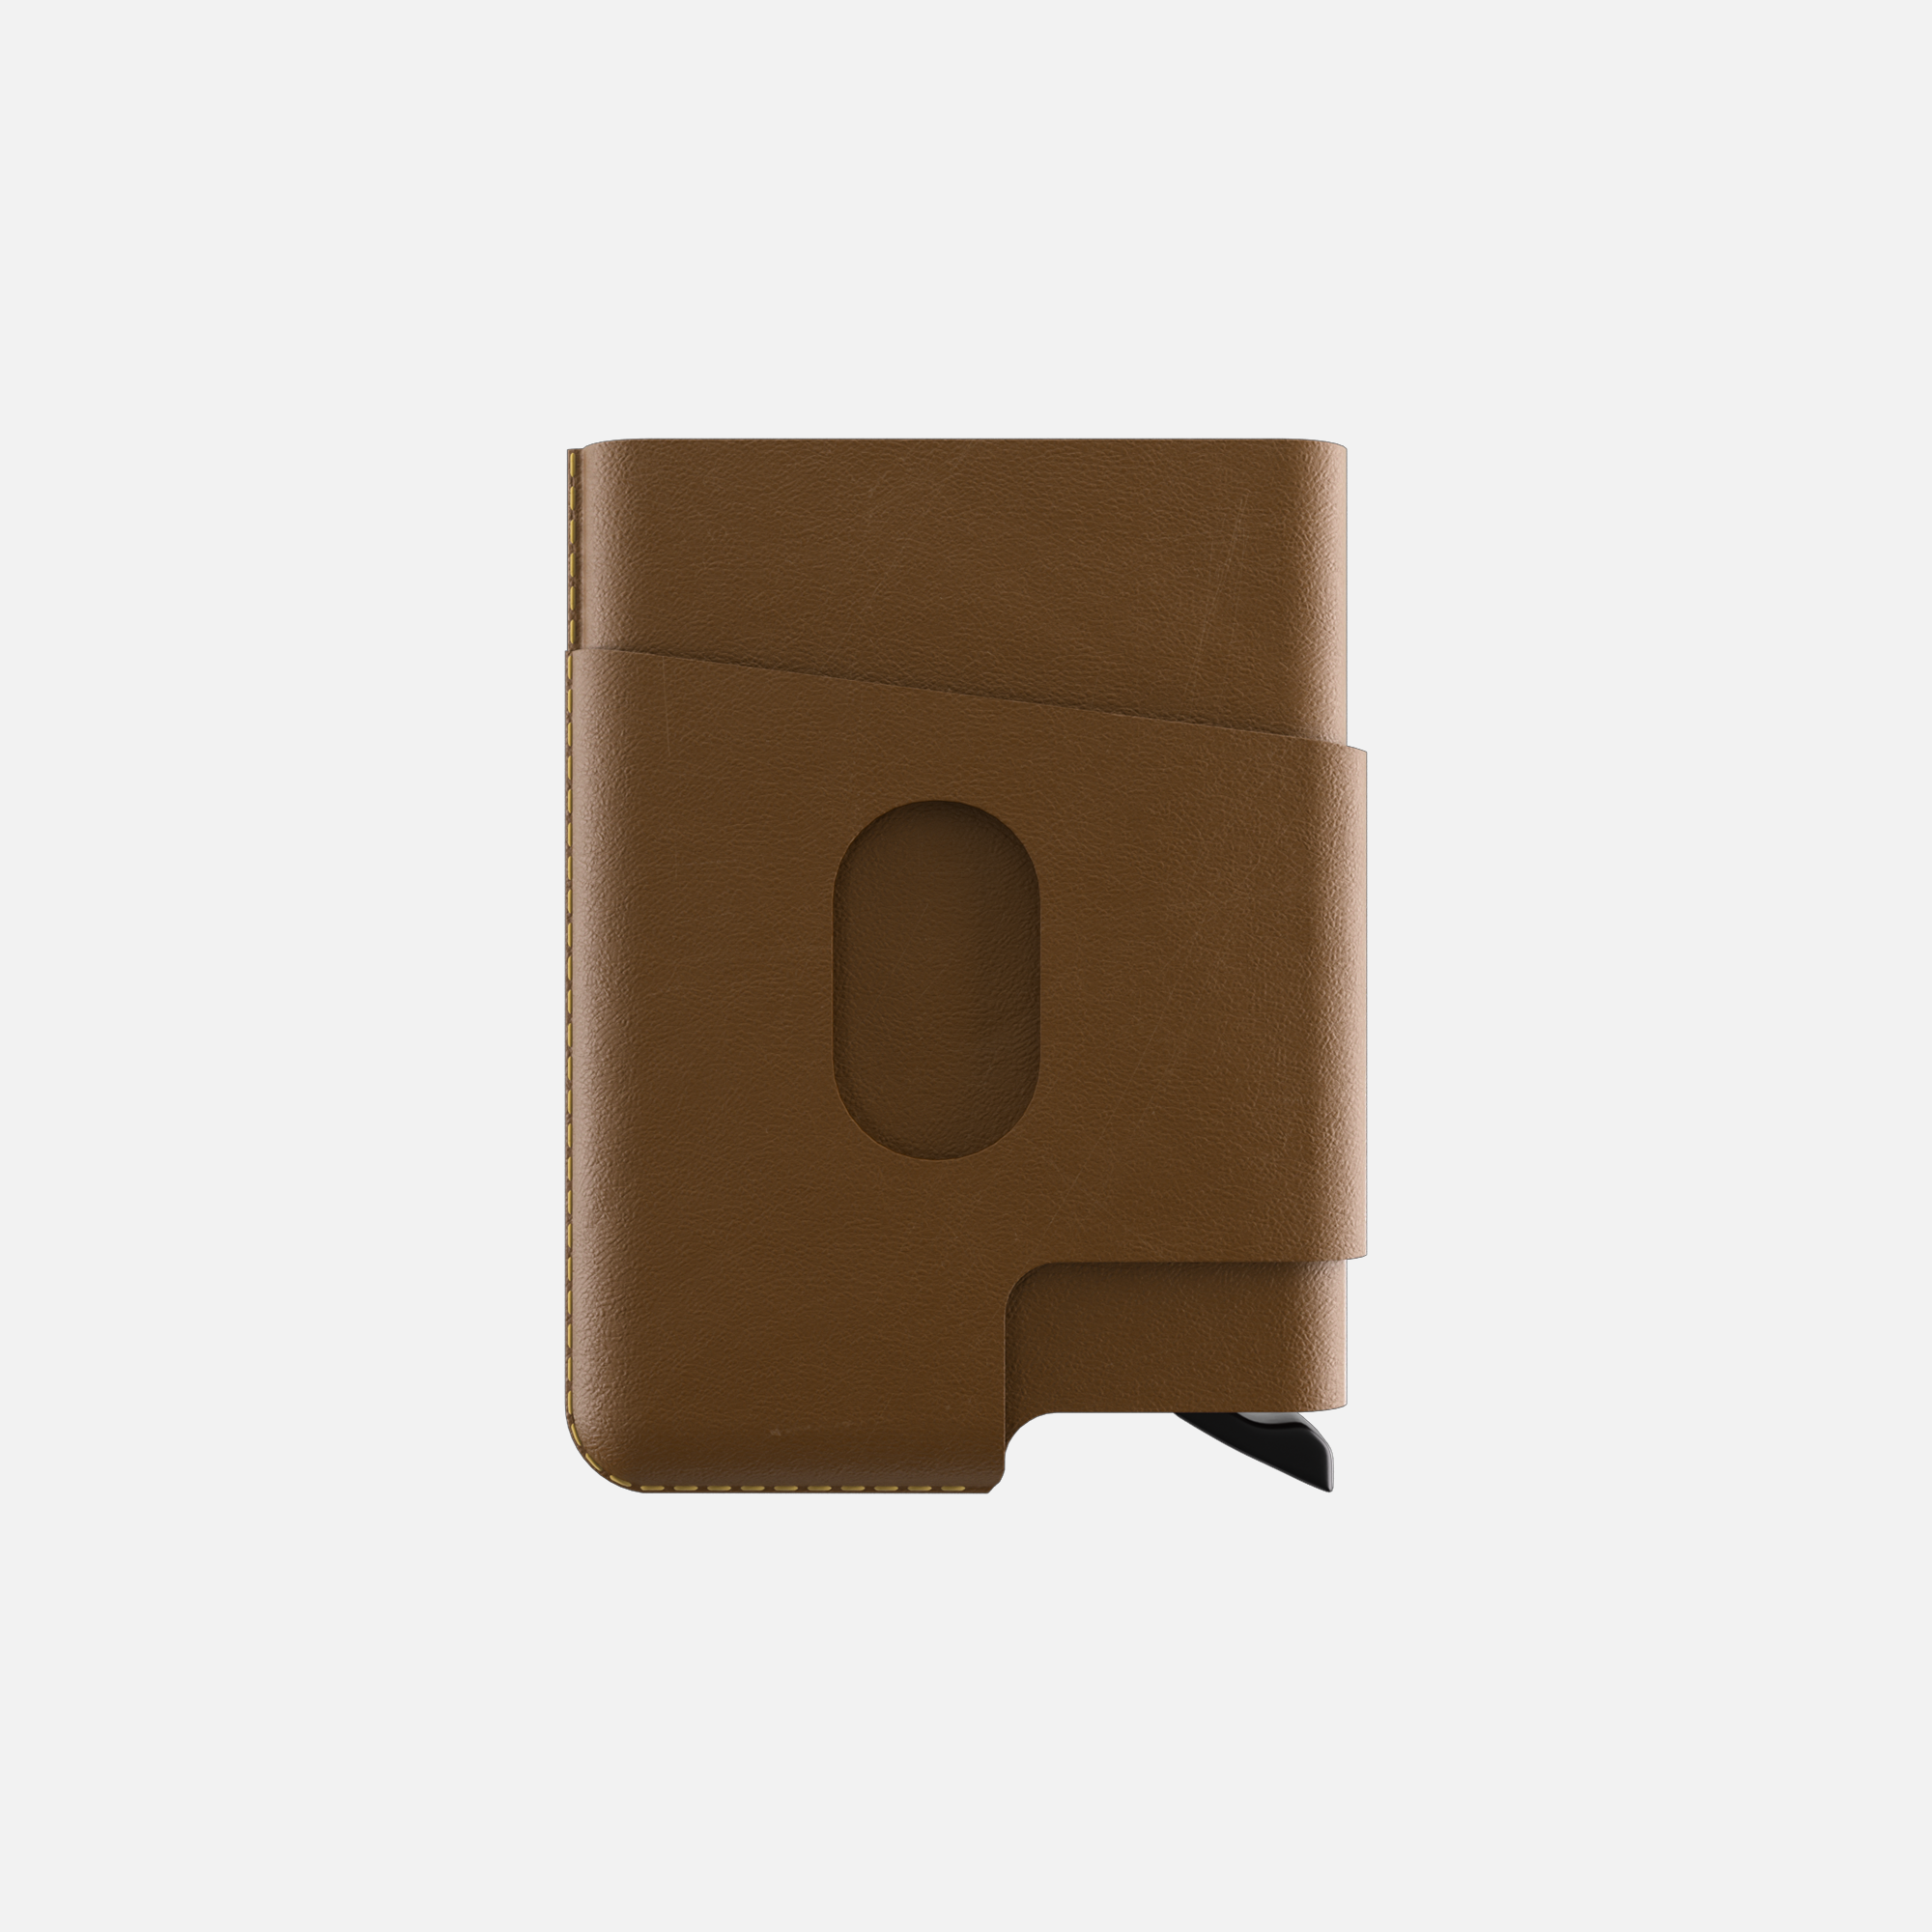 Brown leather cardholder with strap closure on a white background.